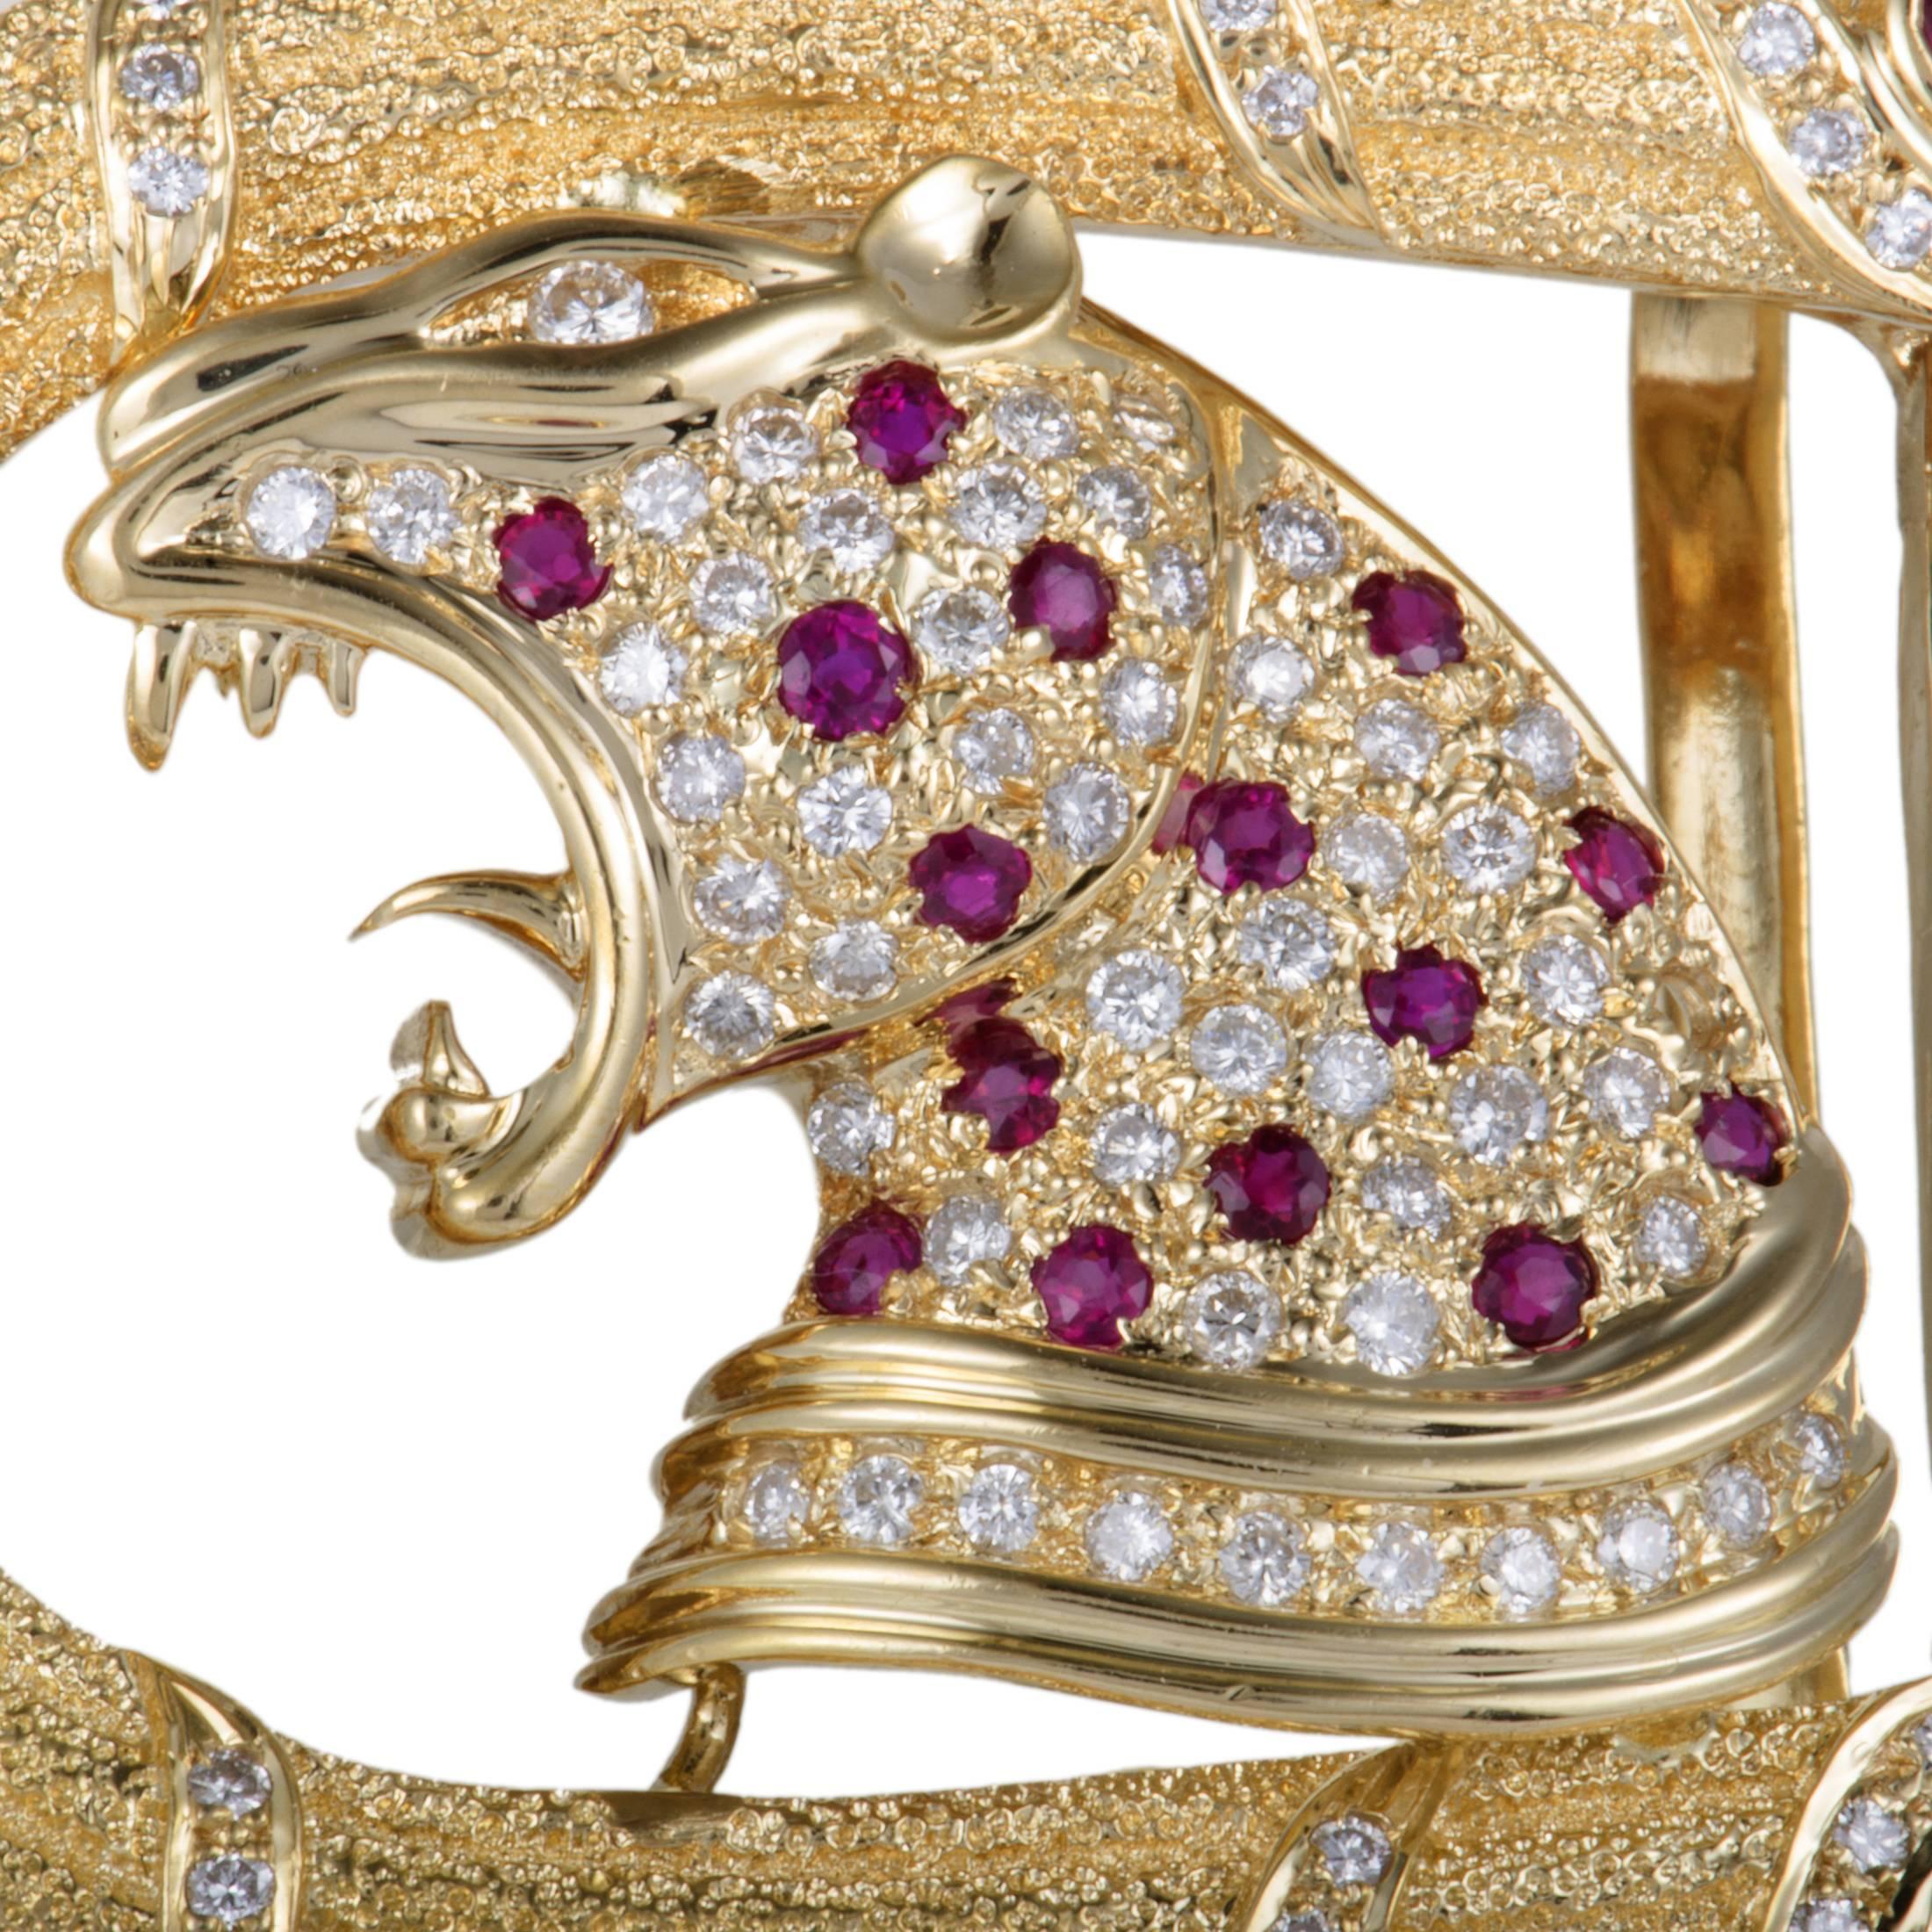 Extravagantly designed in classy 18K yellow gold, this exceptionally unique belt buckle blings from a mile away! The incredible item features 1.43ct of sparkling diamonds and 1.49ct of dazzling rubies in its stunningly fierce design.
